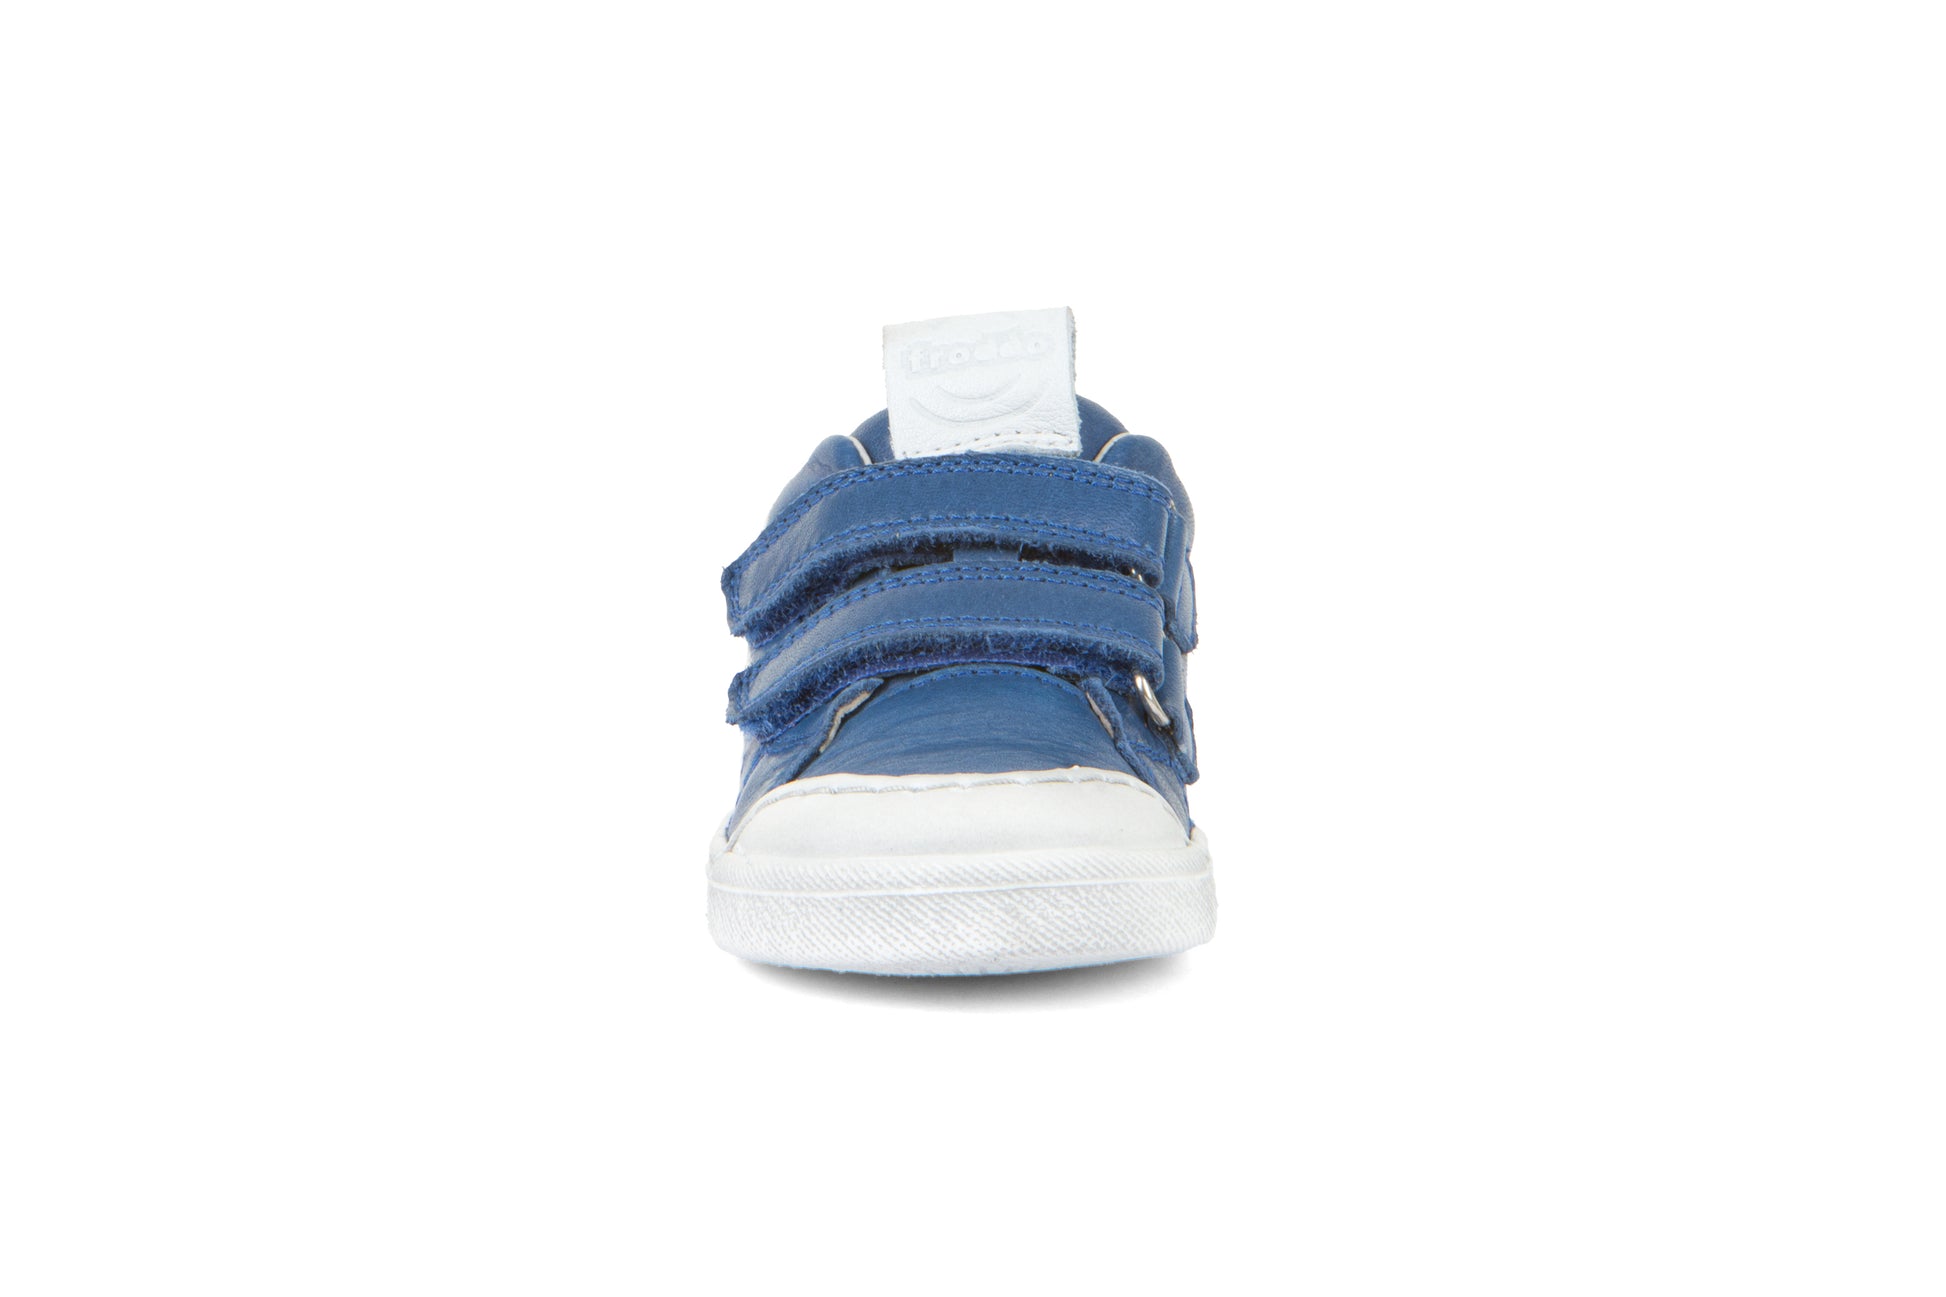 A boys casual shoe by Froddo, style G2130290-1 Rosario, in blue with white trim, velcro fastening. Front view.